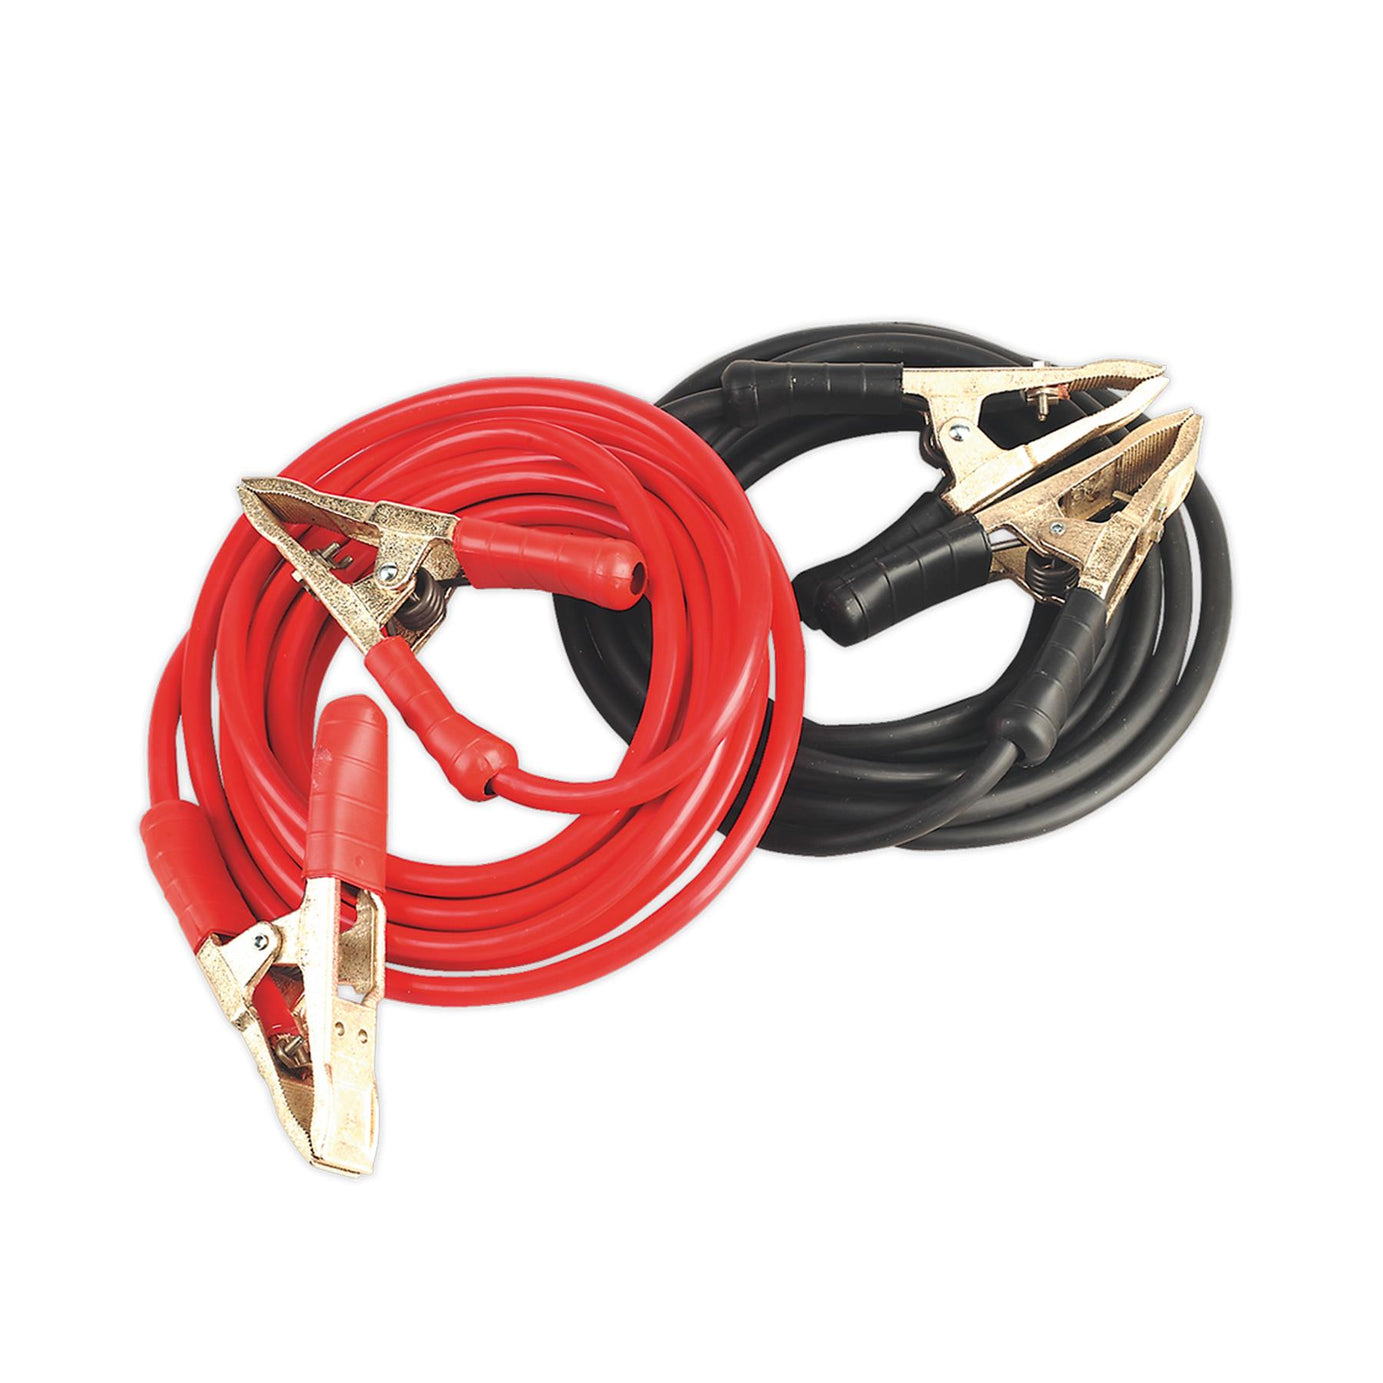 Sealey Booster Cables Extra H-Duty Clamps 50mmx6.5m Copper 900A